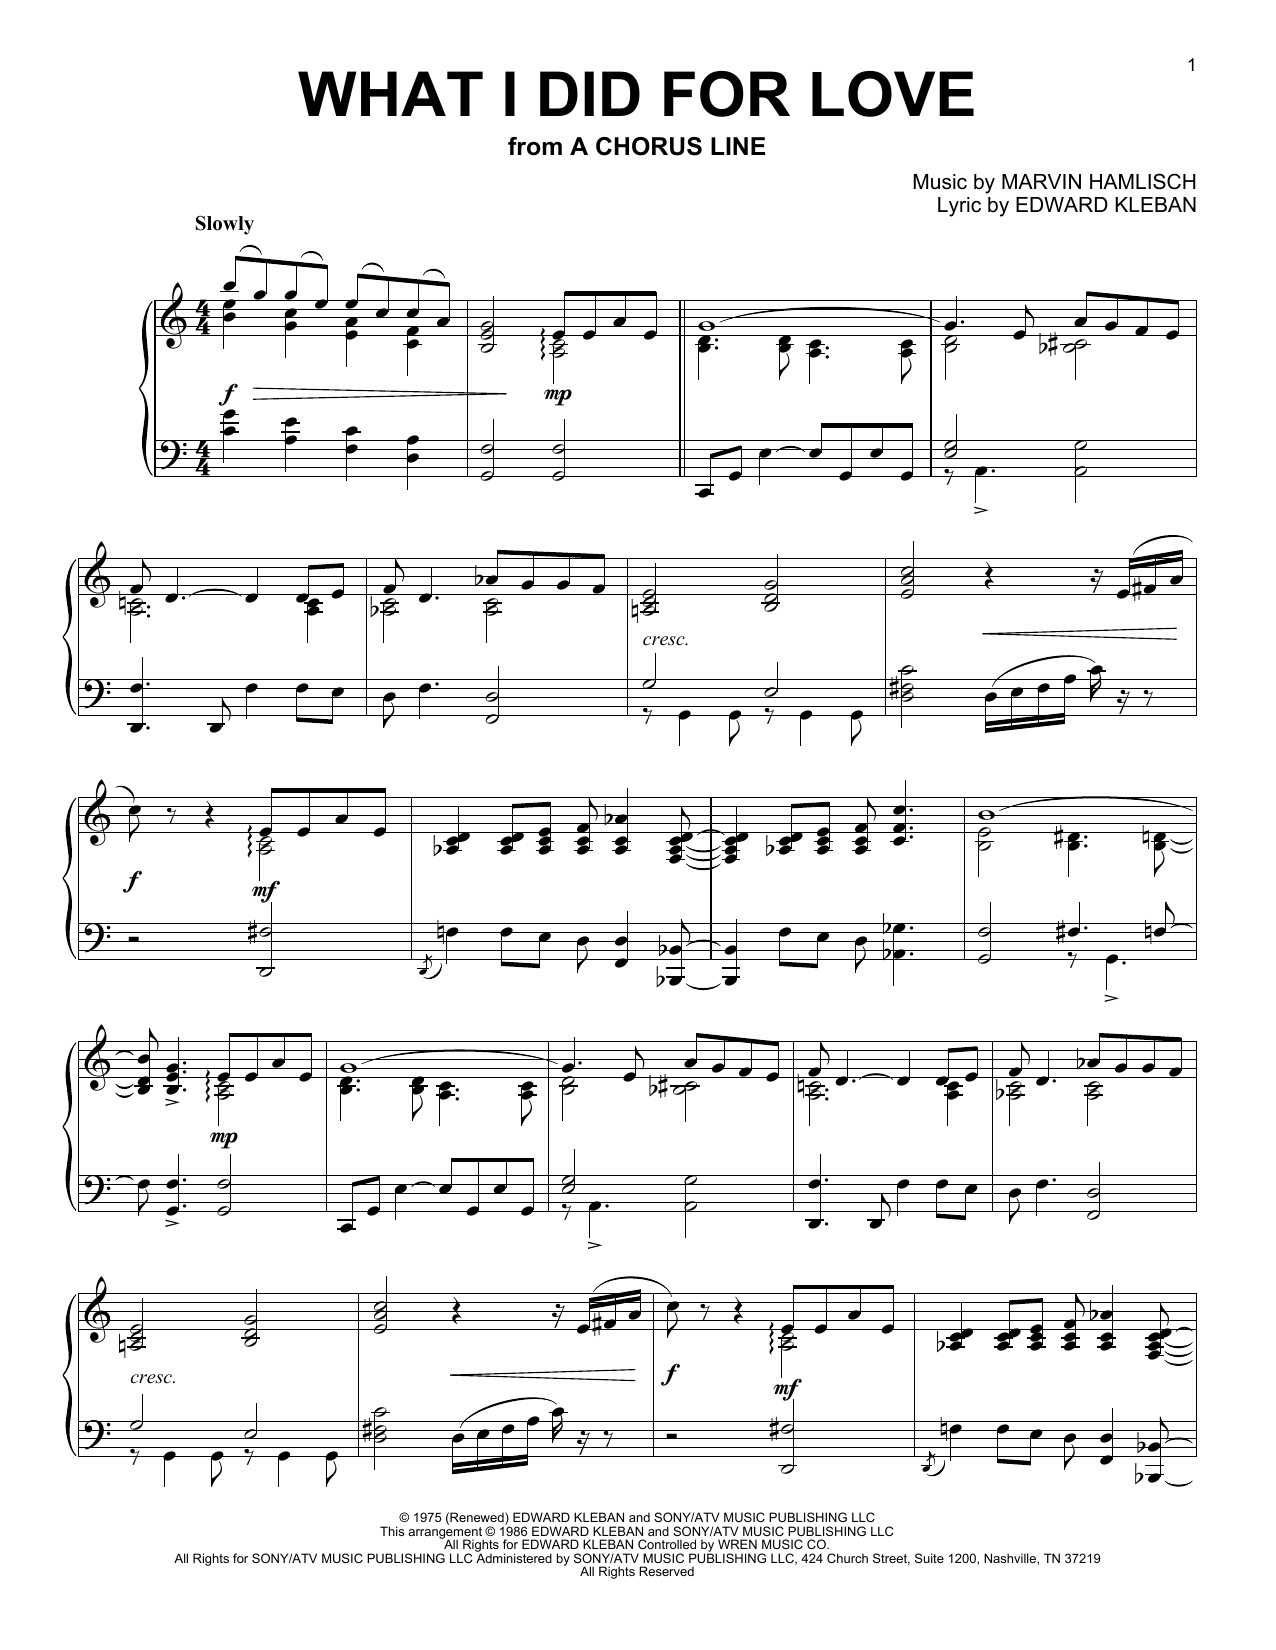 Marvin Hamlisch What I Did For Love (from 'A Chorus Line') sheet music preview music notes and score for Piano including 3 page(s)